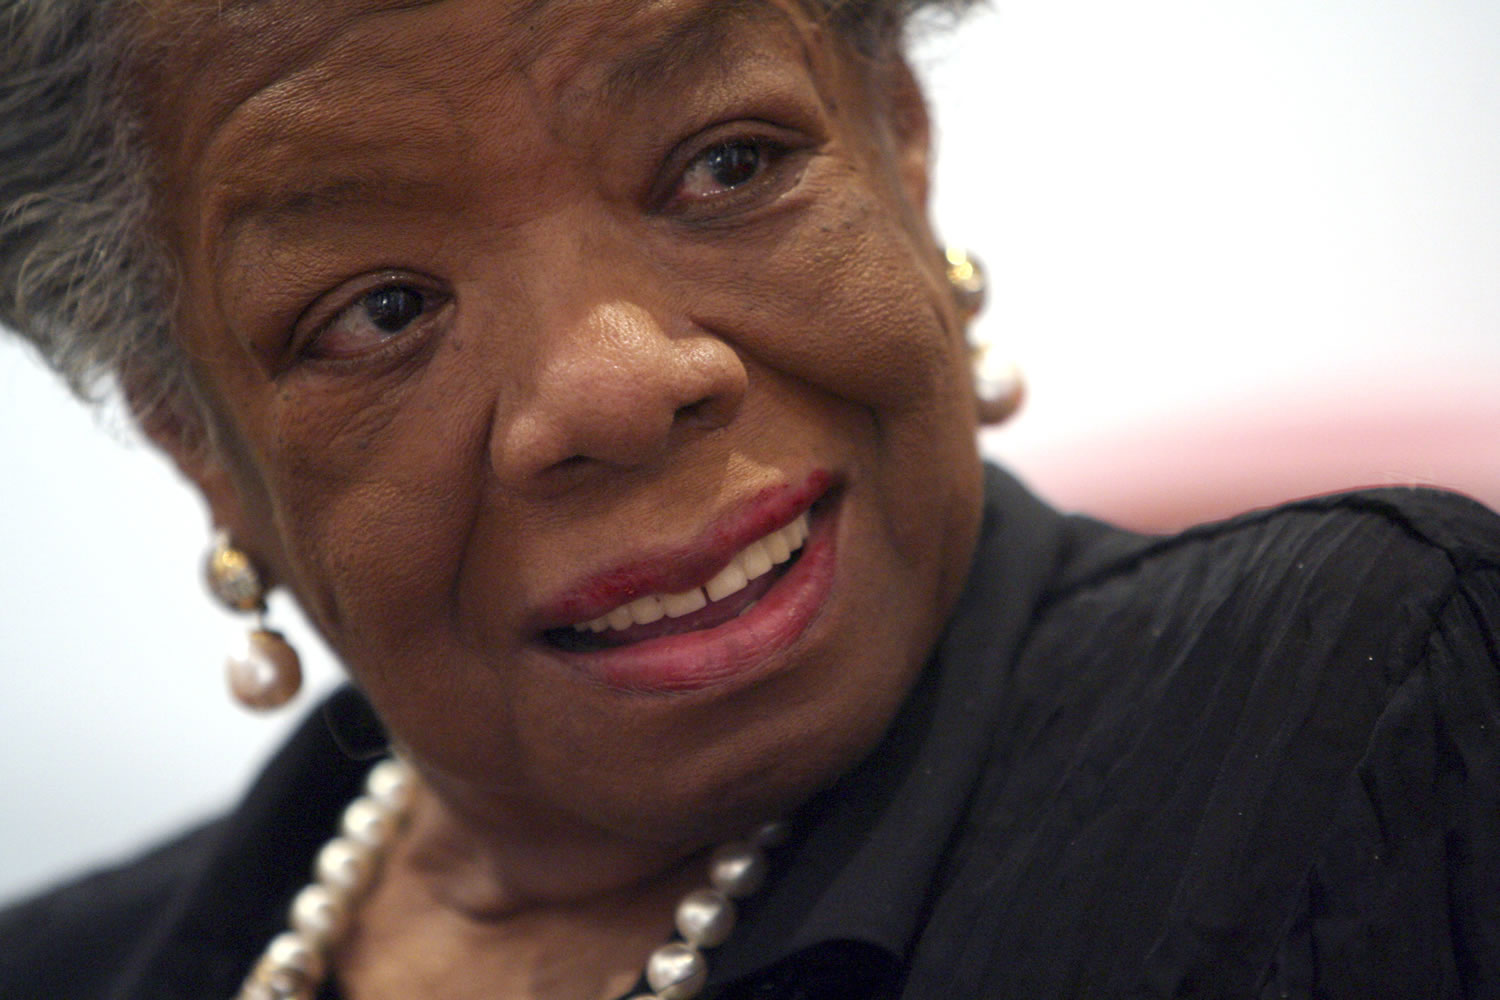 American poet and novelist Maya Angelou smiles during an interview with The Associated Press in New York in 2008. Angelou has died, Wake Forest University said Wednesday.